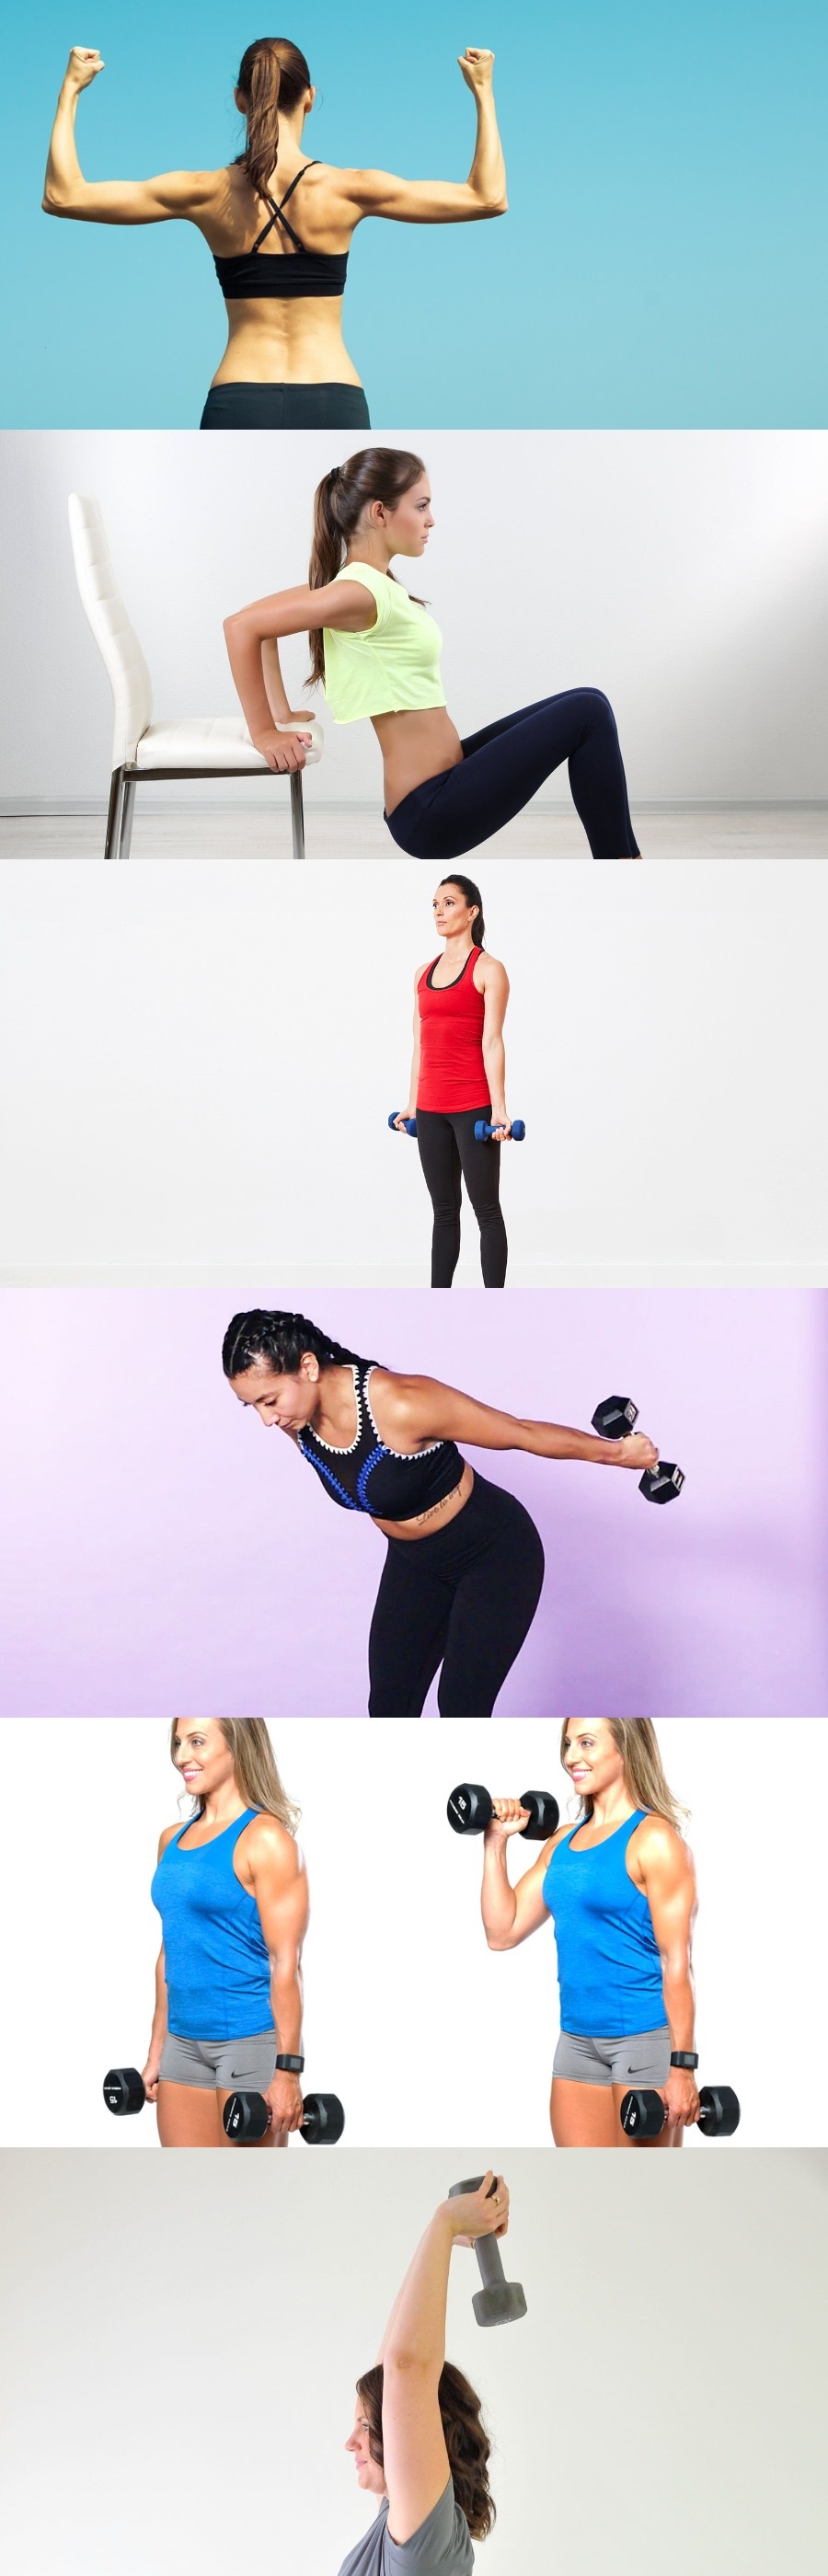 Exercises for Slim and Toned Arms